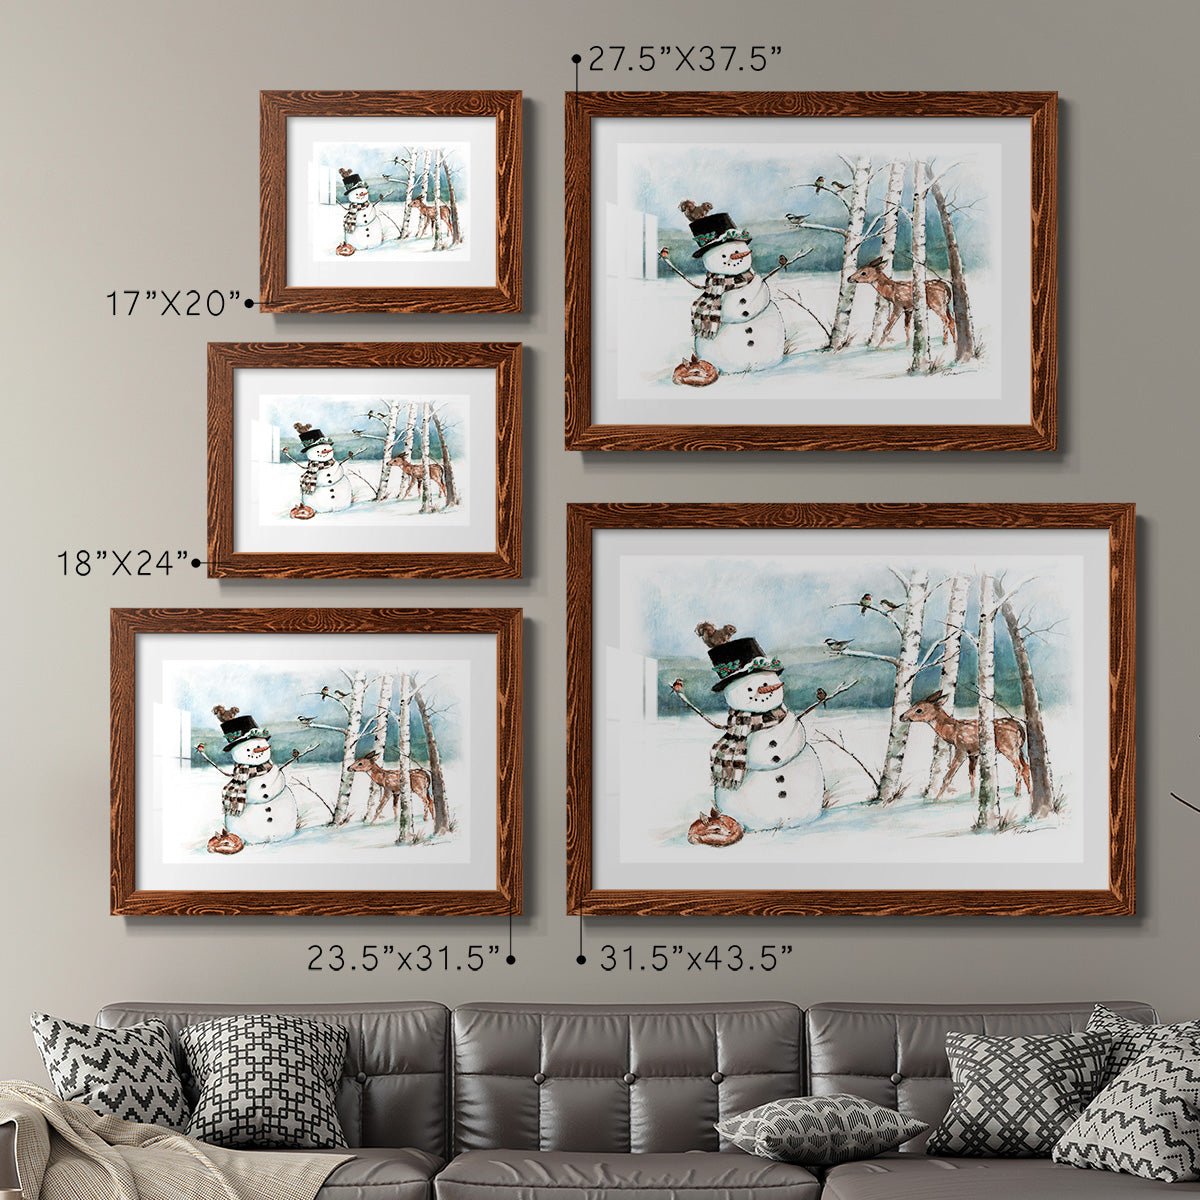 Snow Friends-Premium Framed Print - Ready to Hang